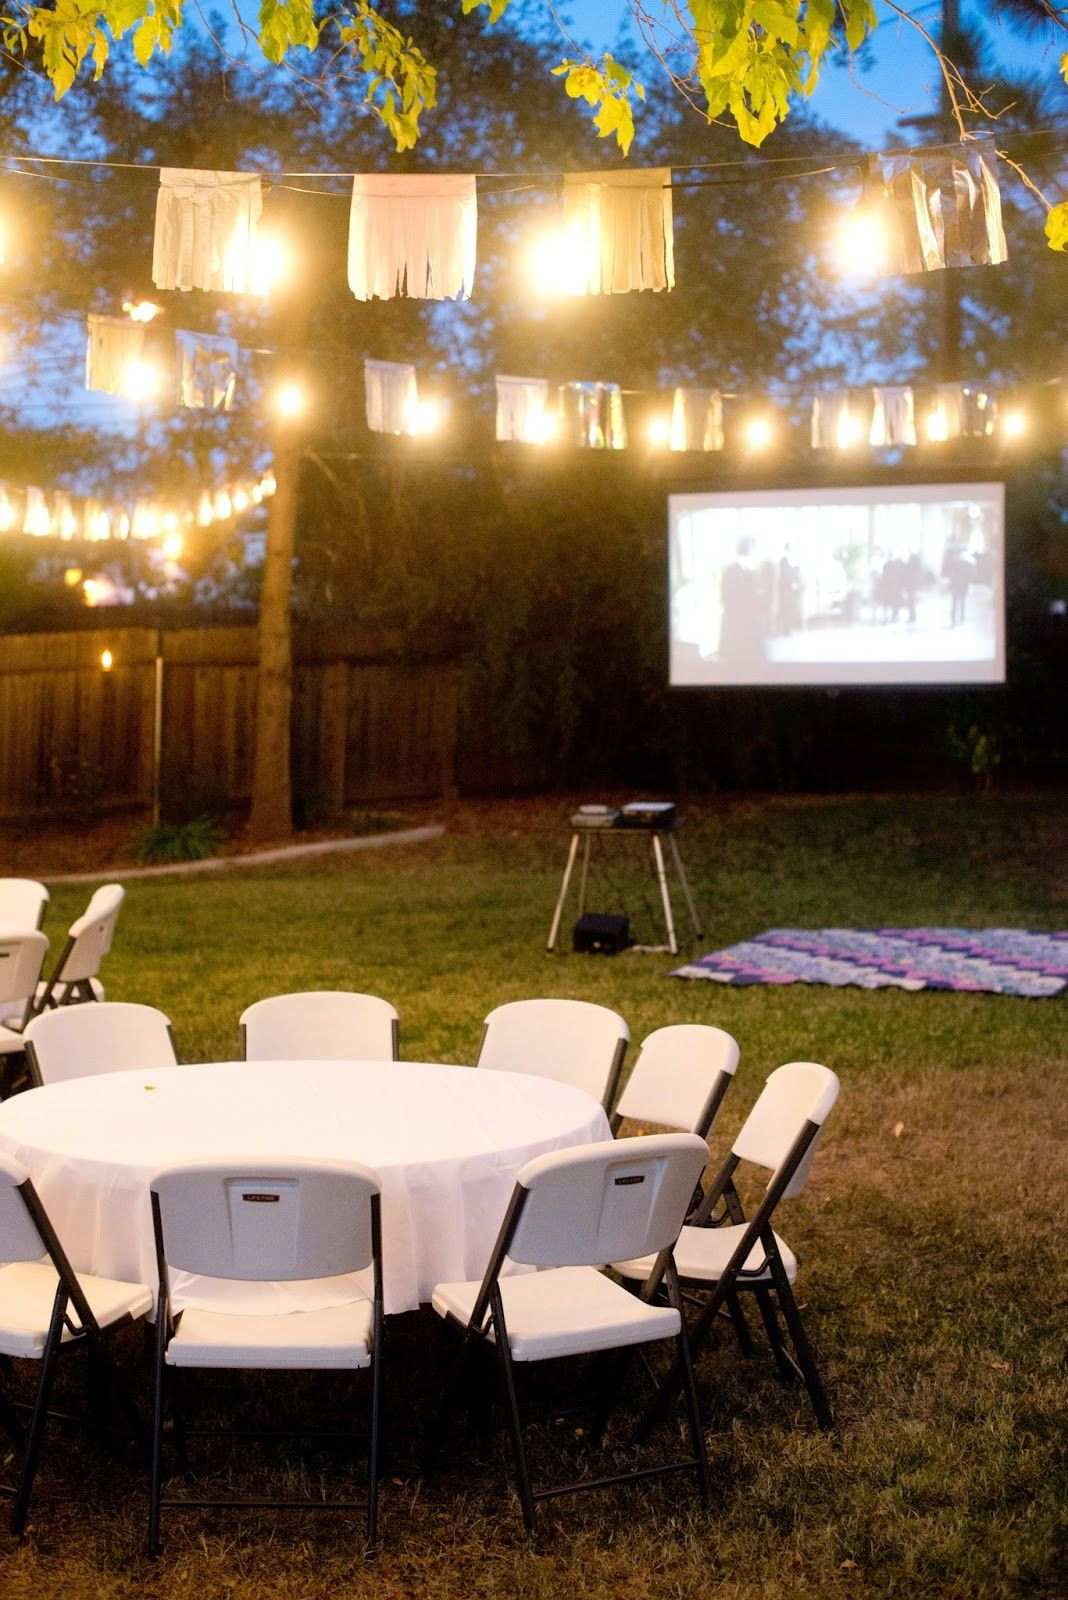 Backyard Party Decoration Ideas For Adults
 Fall Backyard Birthday Party and Movie Night